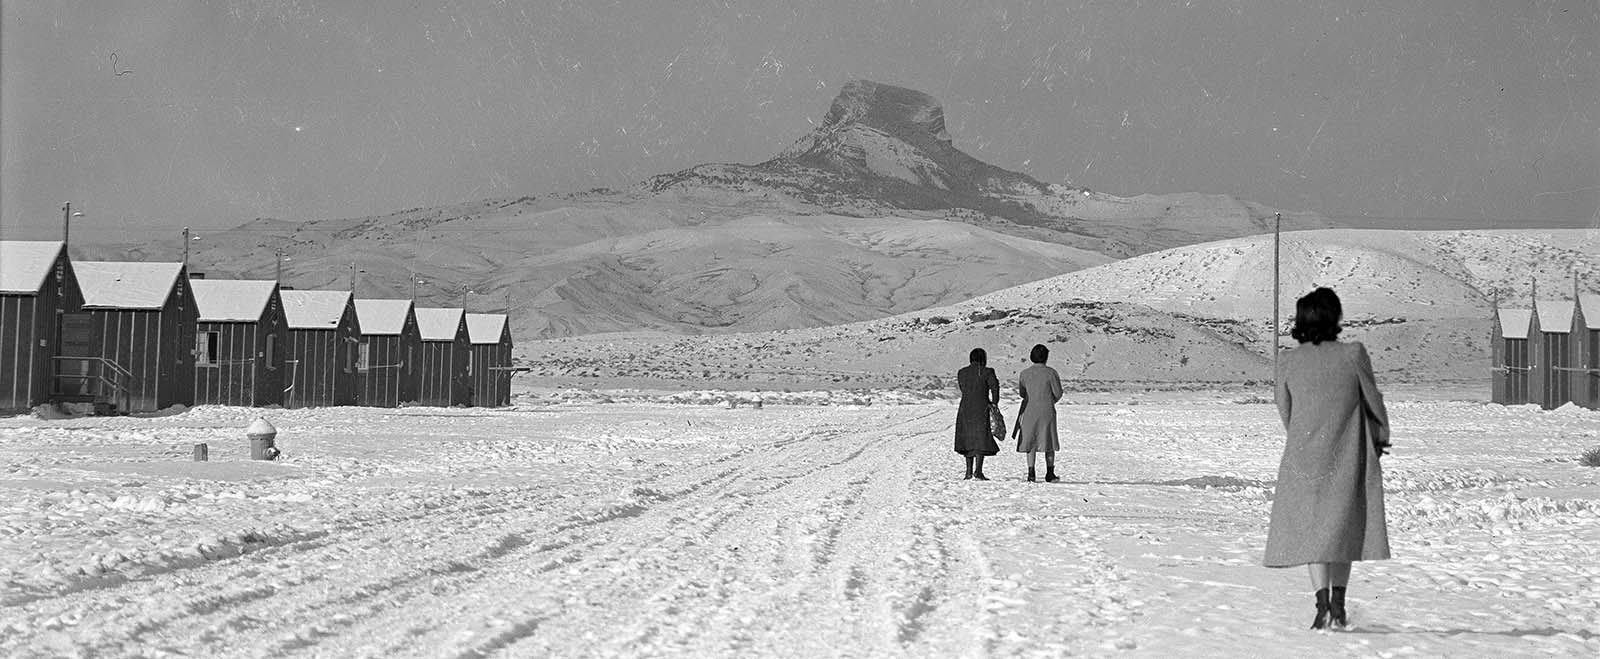 Japanese-American women walk to their barracks at Heart Mountain Relocation Center. MS 89 Jack Richard Photograph Collection, McCracken Research Library. PN.89.111.21238.3 (detail)